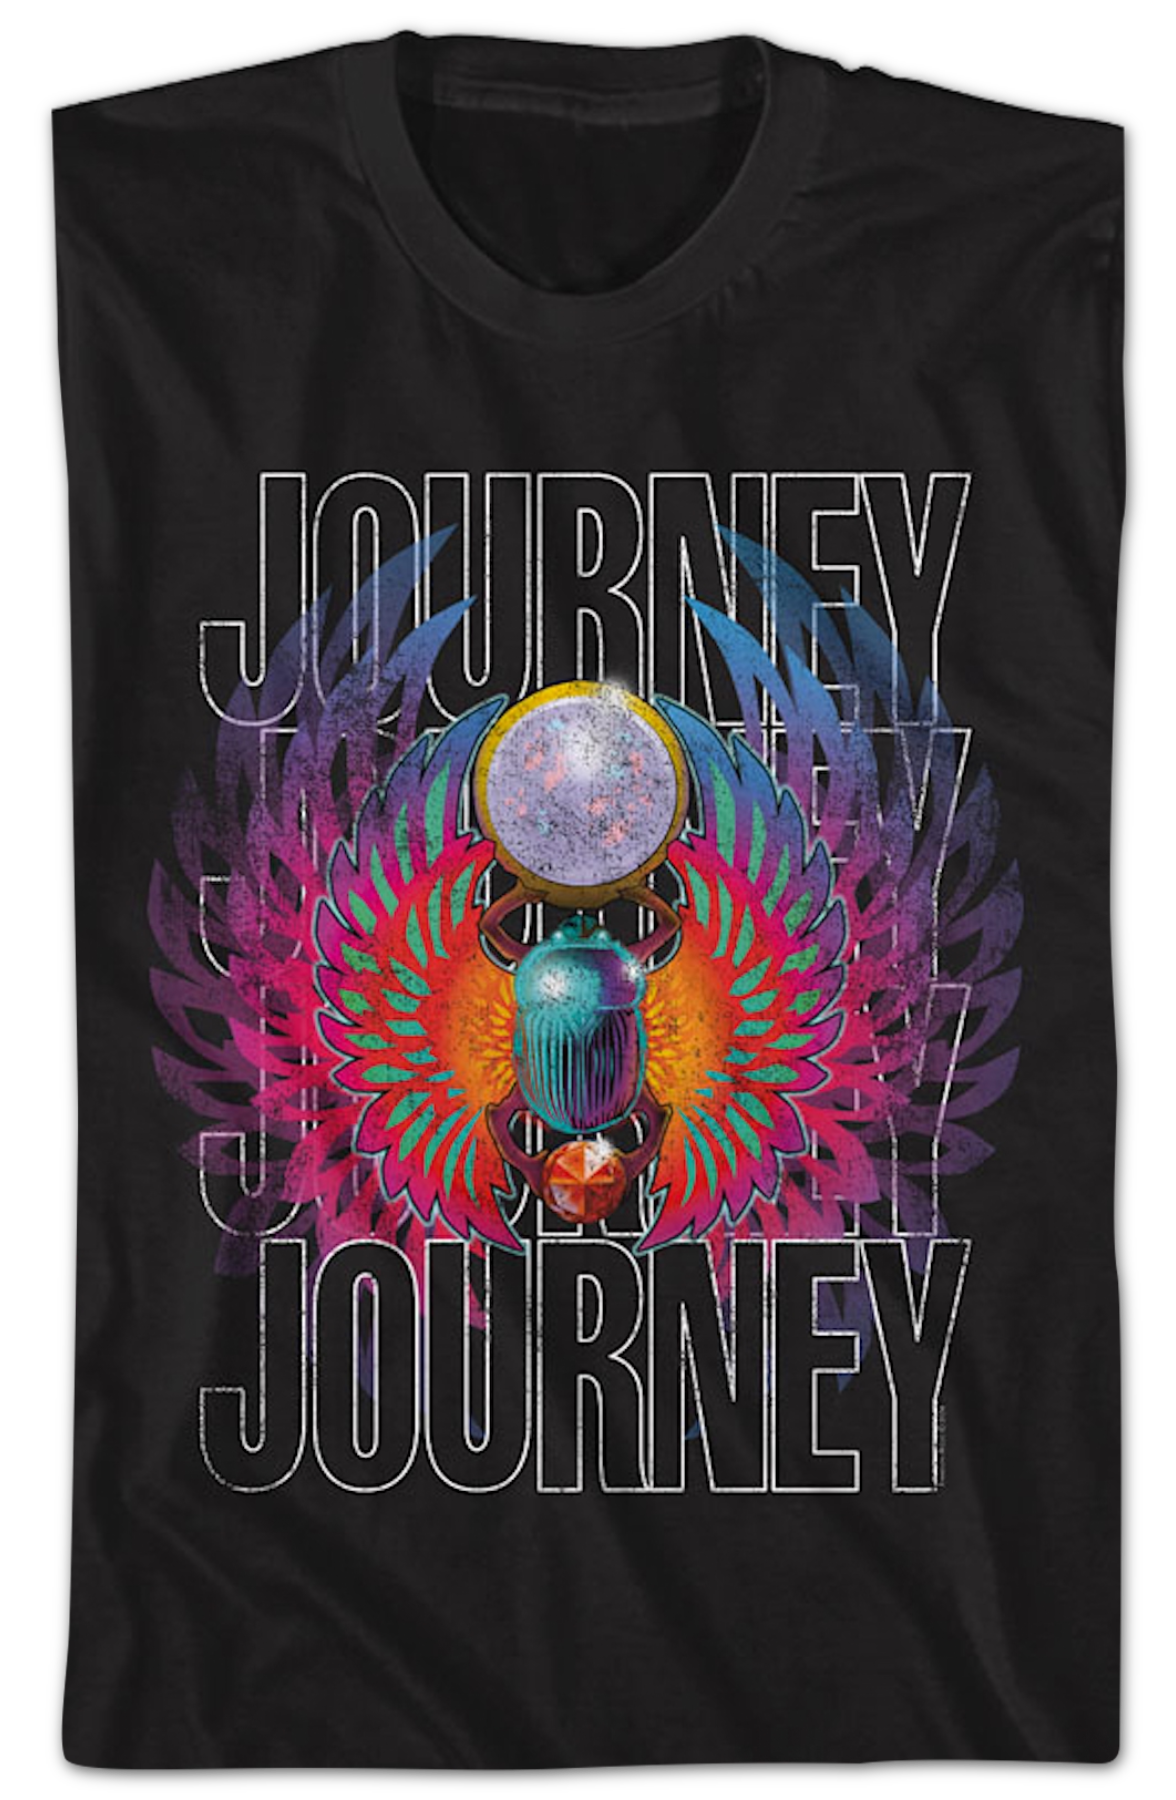 Scarab Beetle In Motion Journey T-Shirt